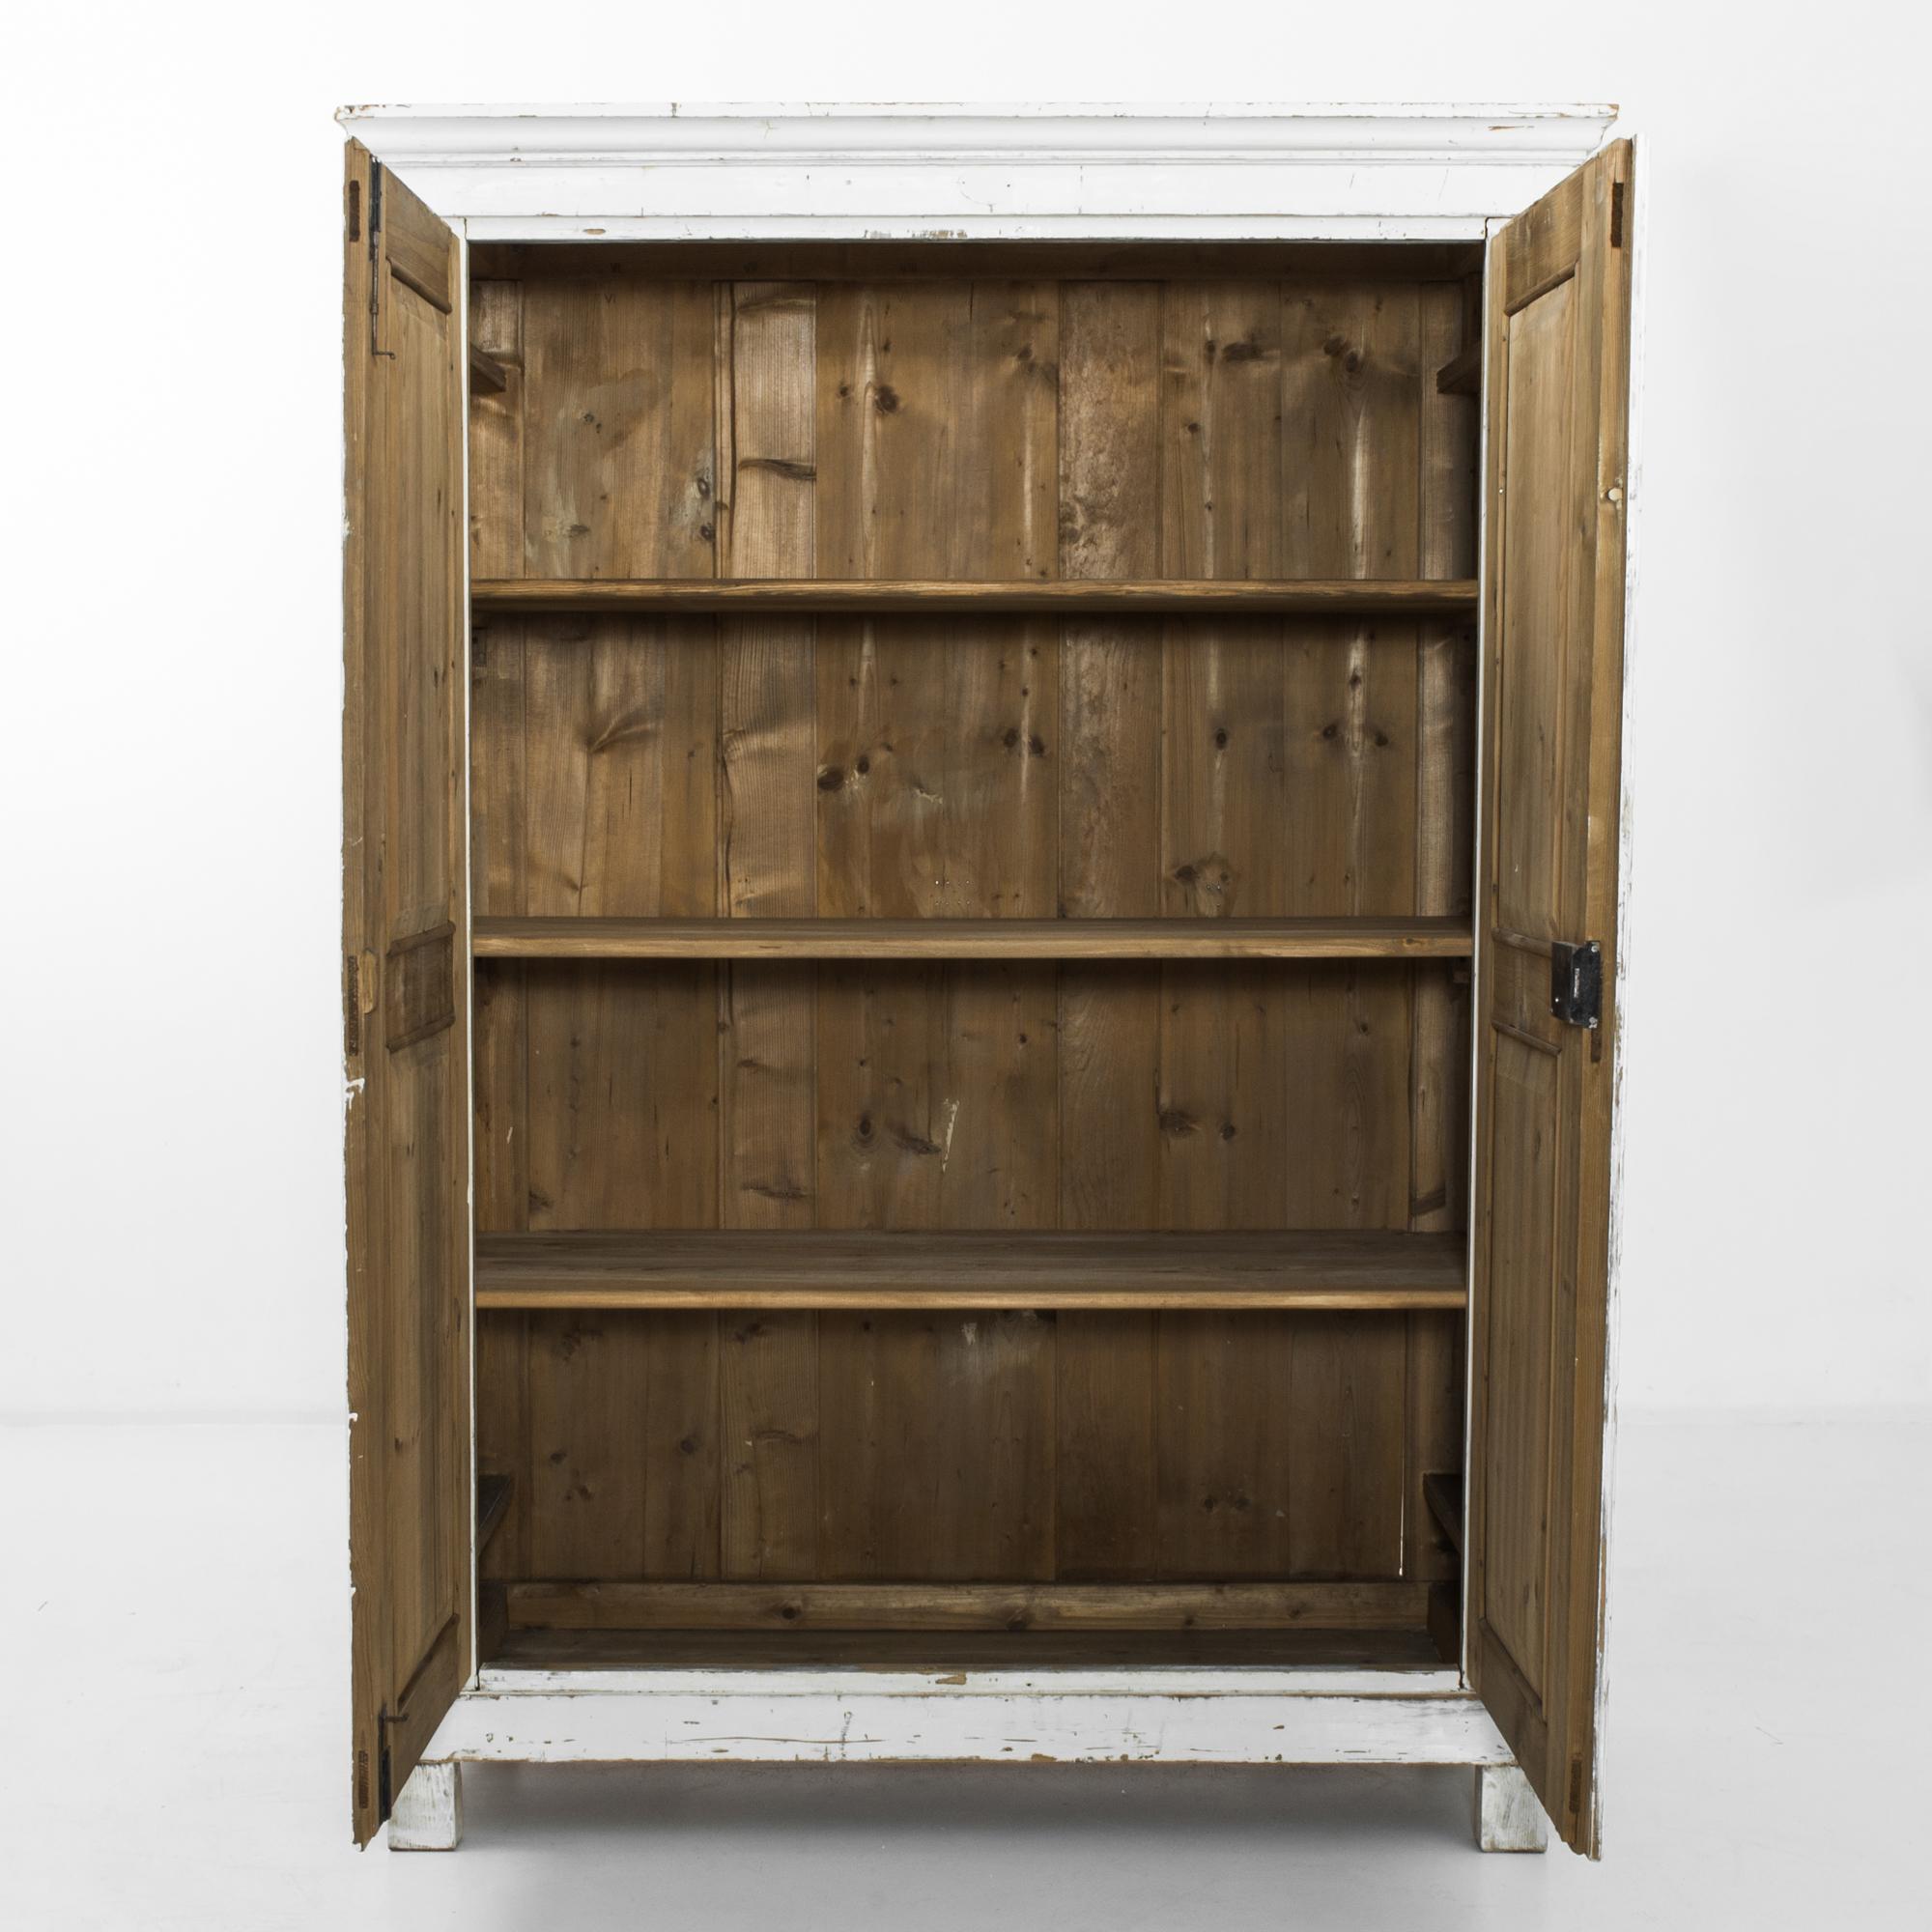 This wooden armoire with crown molding was made in the former Czechoslovakia. Originally painted white, the armoire displays a time-worn patina, which reveals the golden brown hue of the wood beneath and evokes the rustic charm of the countryside.